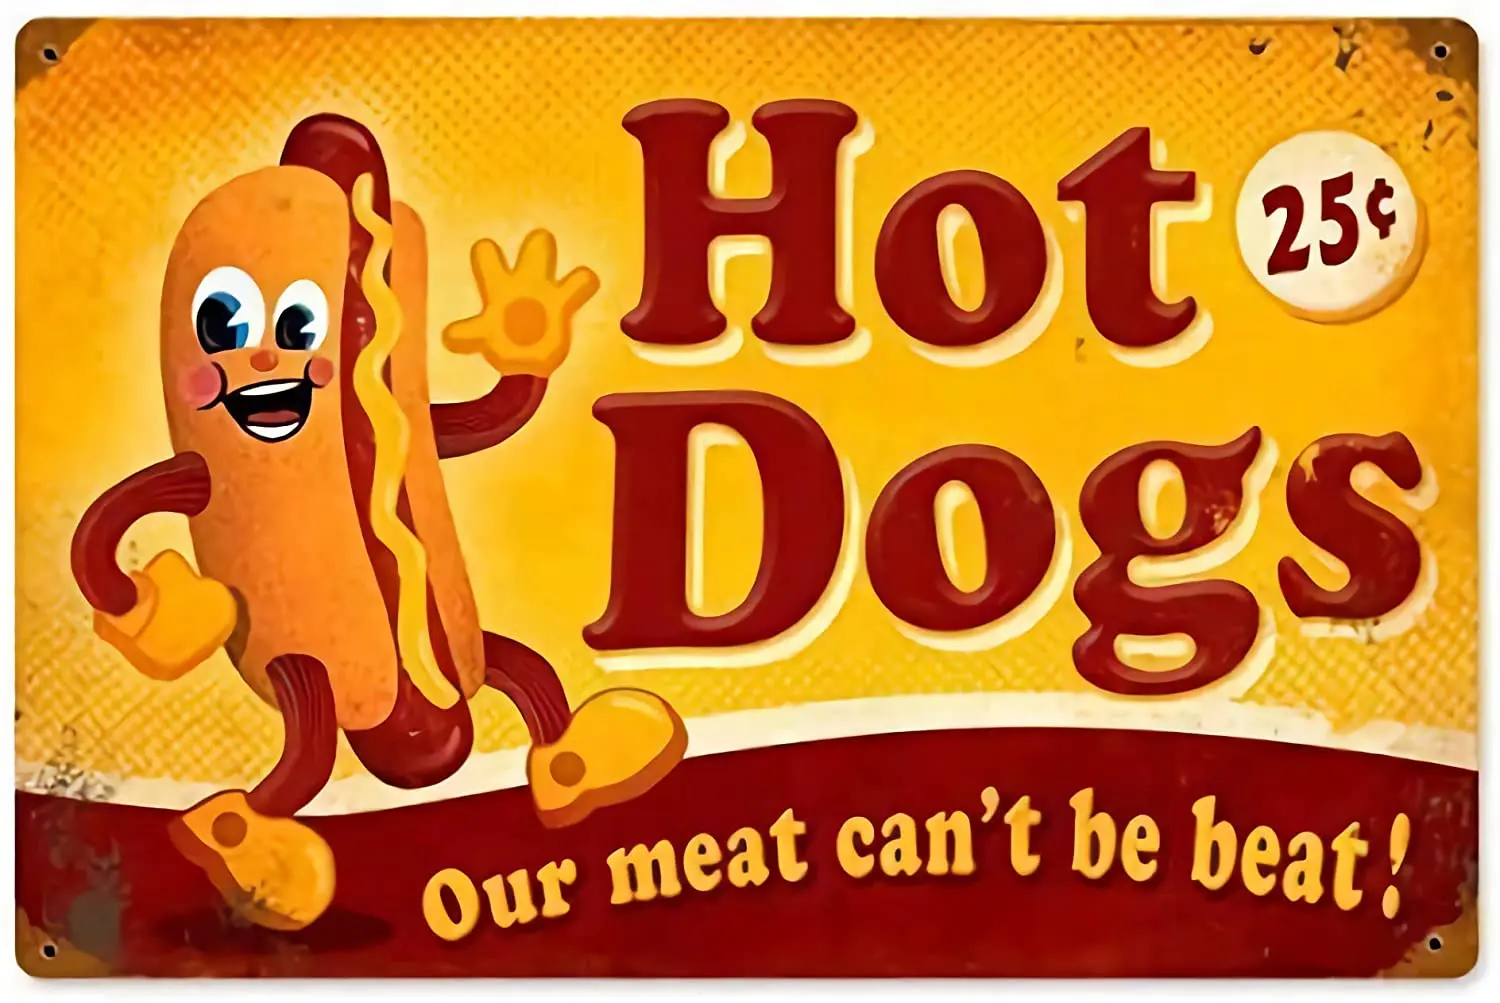 

Kalynvi New Metal Poster Hot Dogs,Our Meat Can't Be Beat Vintage Metal 8x12 Inch Retro Art Home Fast Food Bar Pub Garage Shop